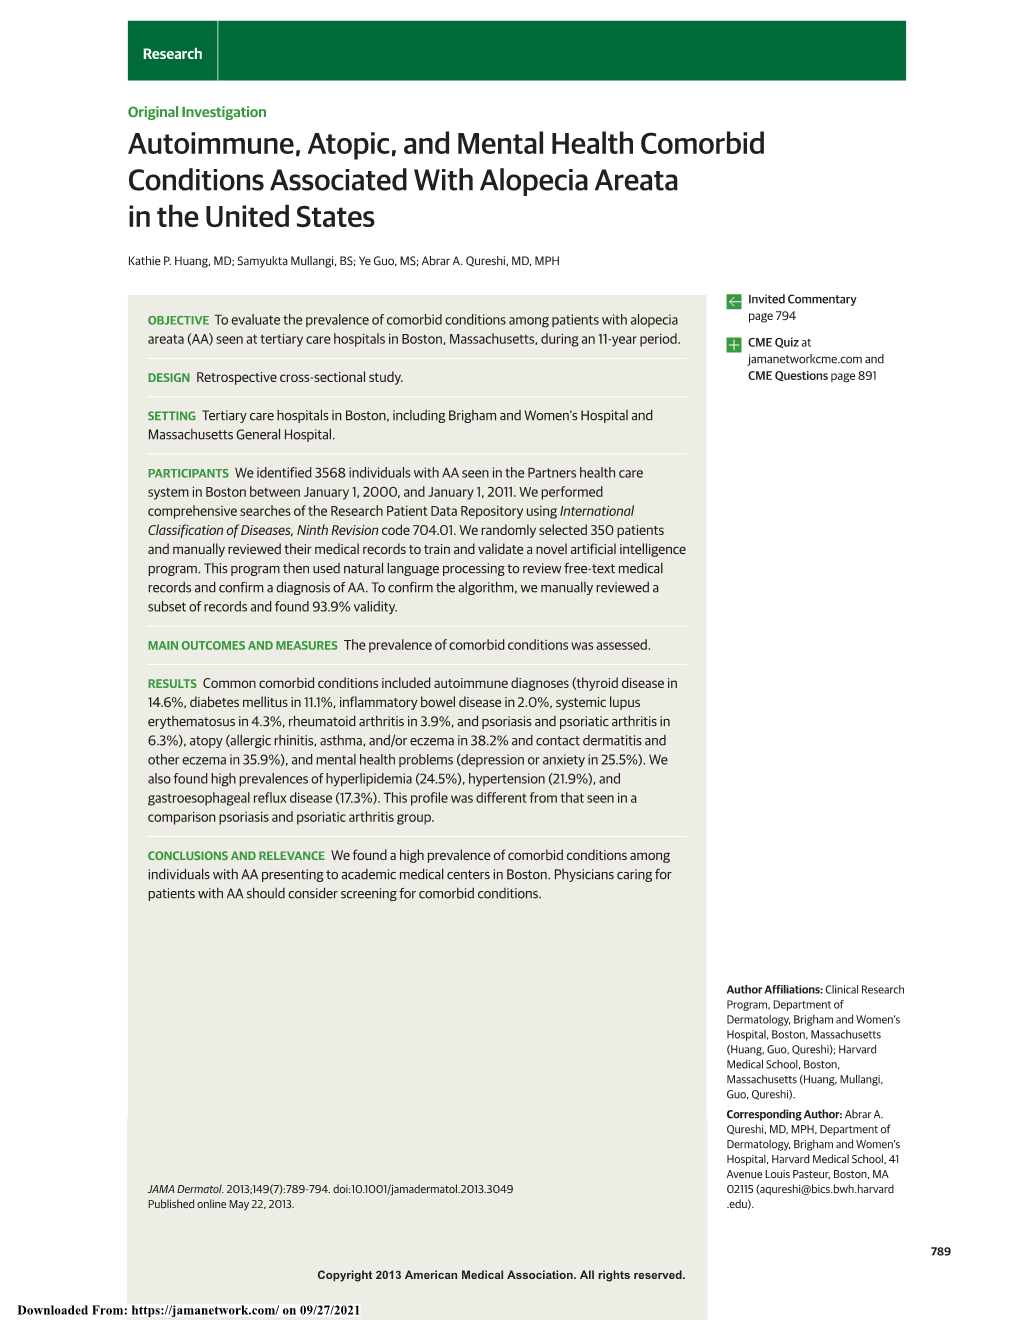 Autoimmune, Atopic, and Mental Health Comorbid Conditions Associated with Alopecia Areata in the United States